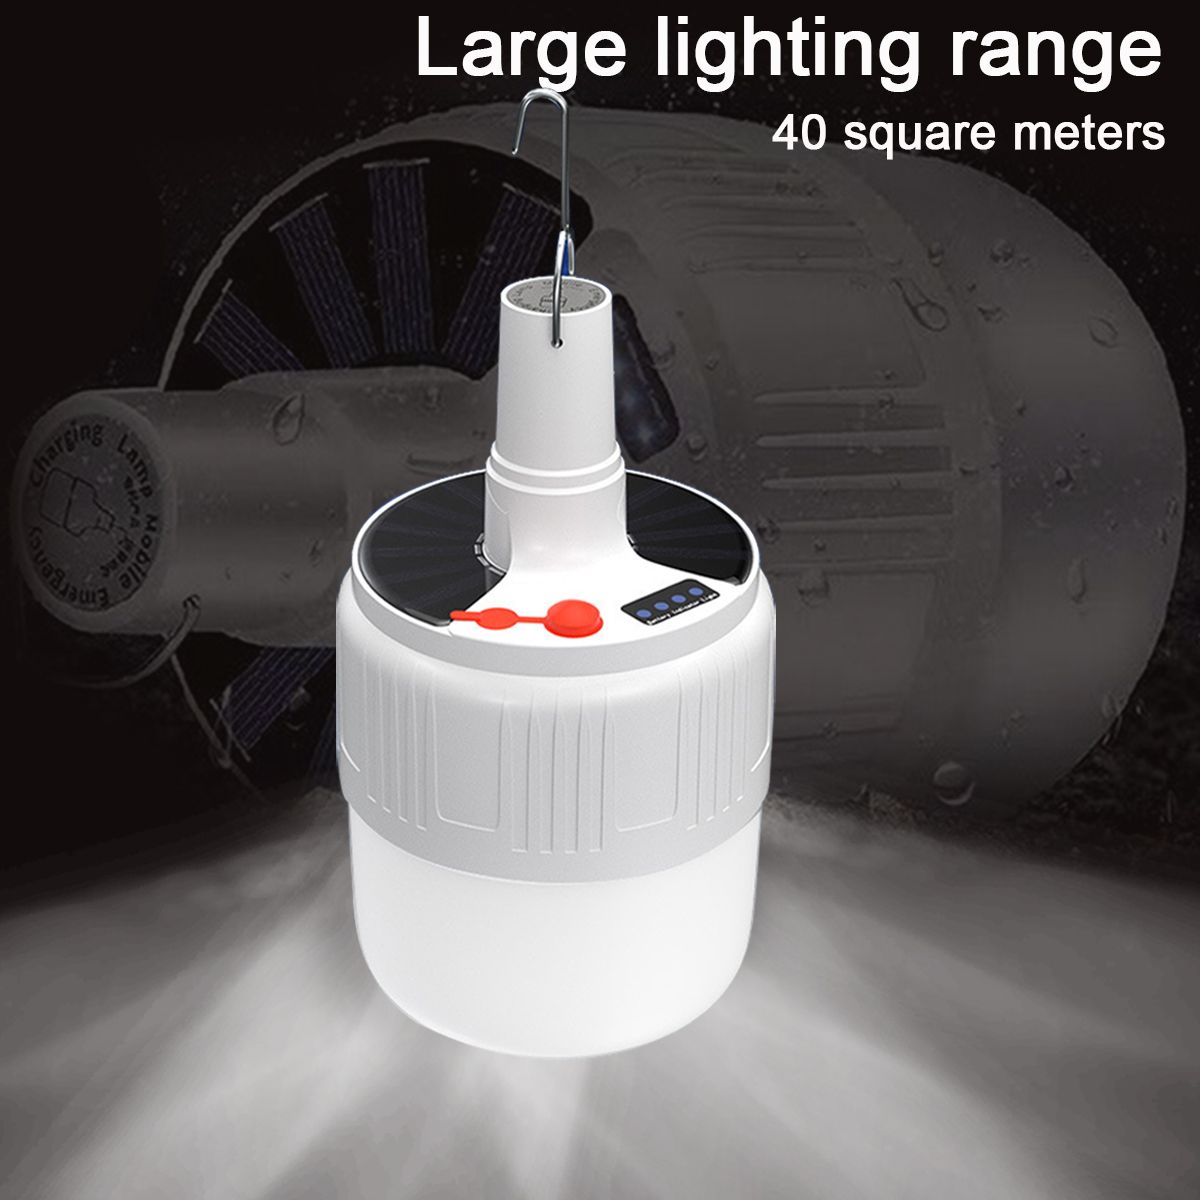 Solar-Powered-Shed-2442LED-Light-Bulb-Rechargeable-Portable-Hanging-Hook-Tent-Camping-Emergency-Lamp-1722824